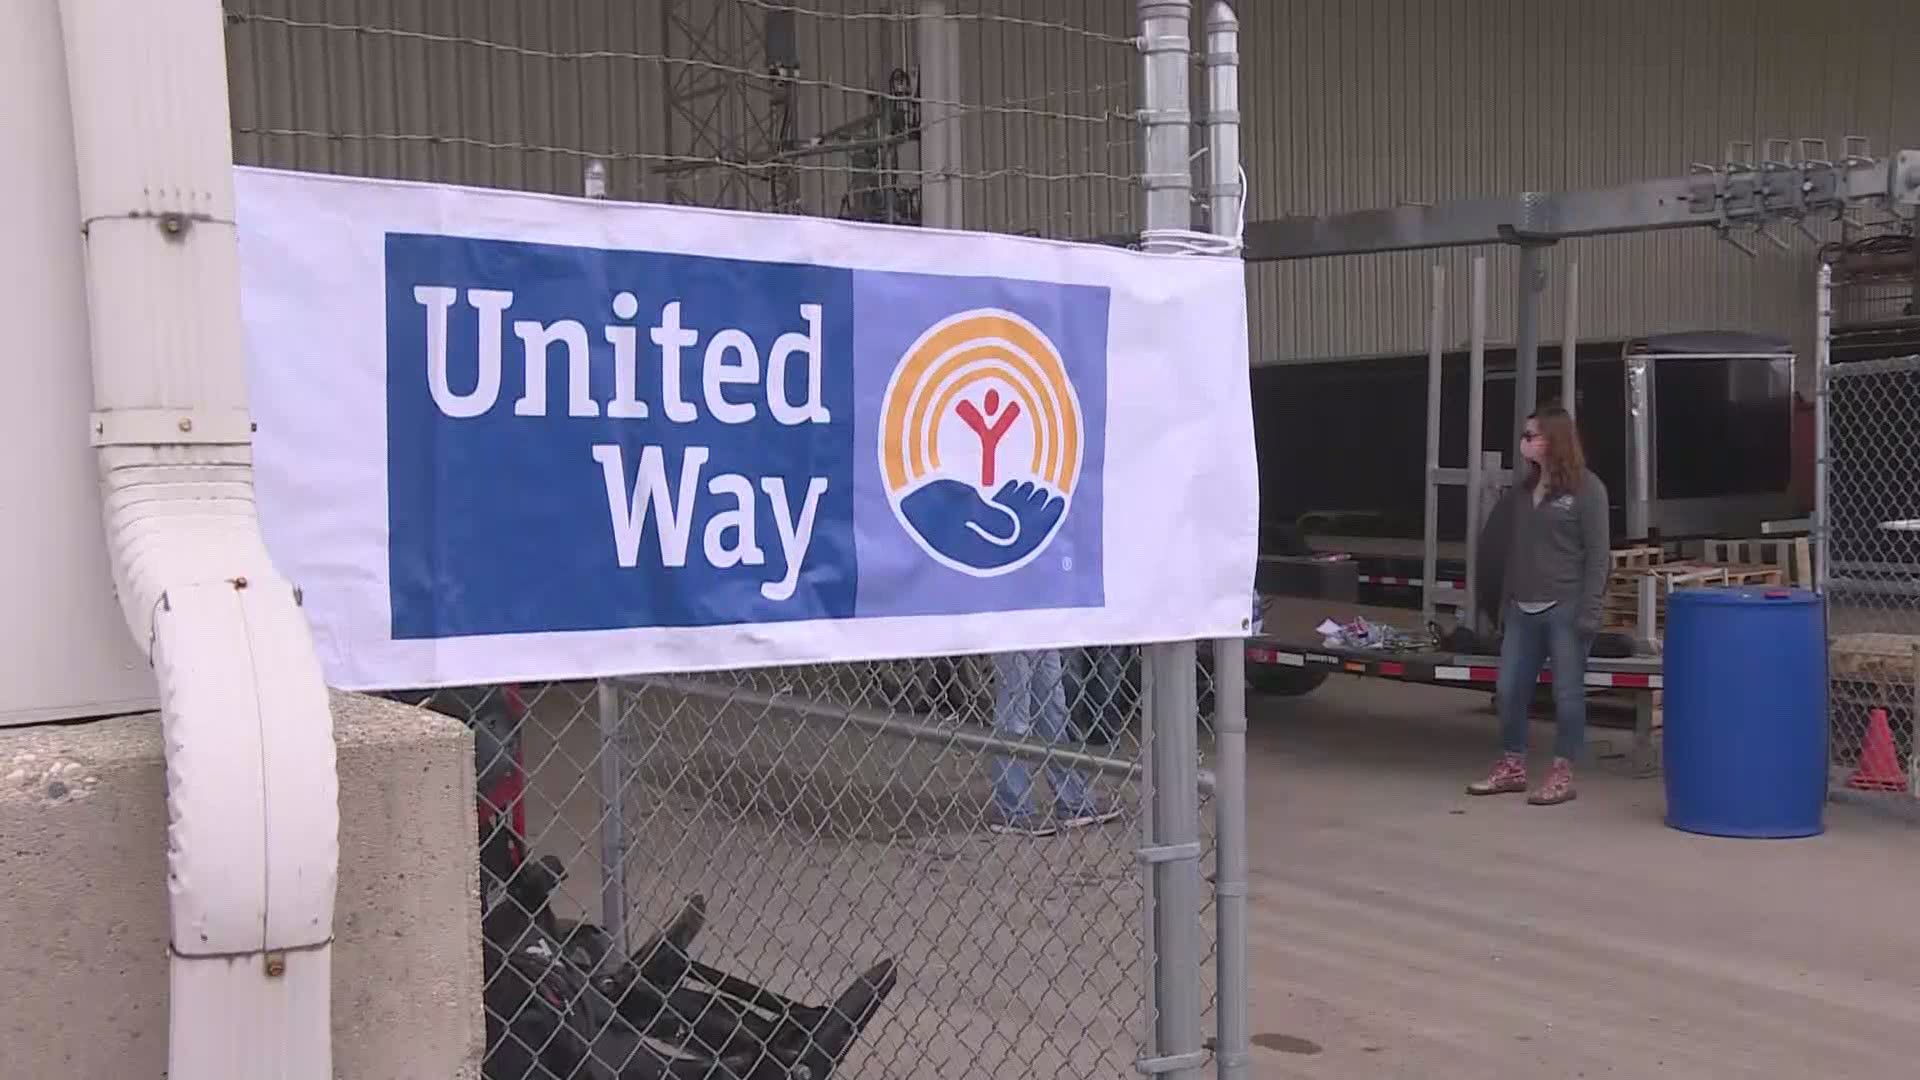 United Way’s Day of Caring expands to month-long event